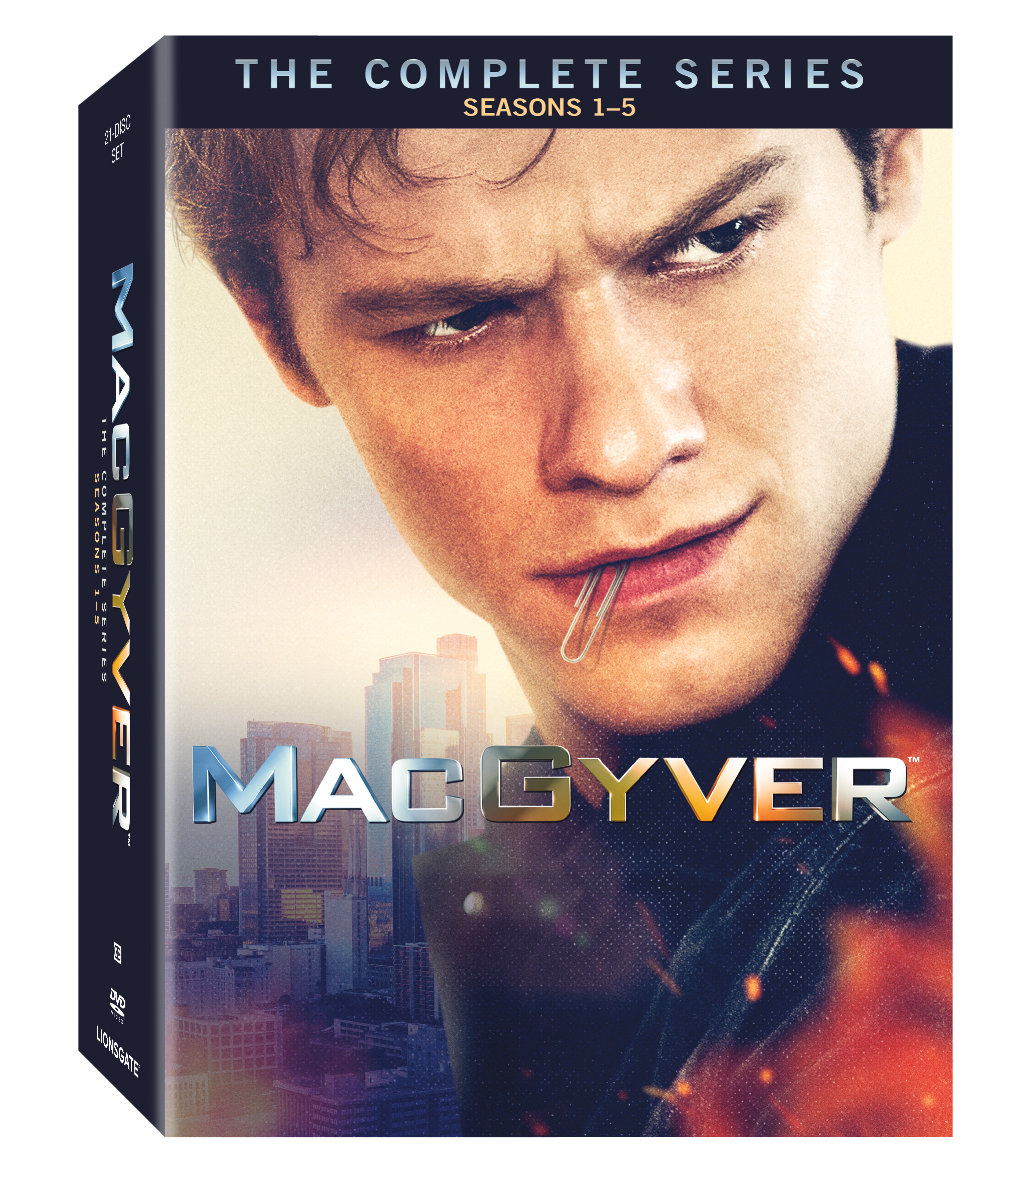 MacGyver The Complete Series Seasons 1-5 DVD cover (Lionsgate)